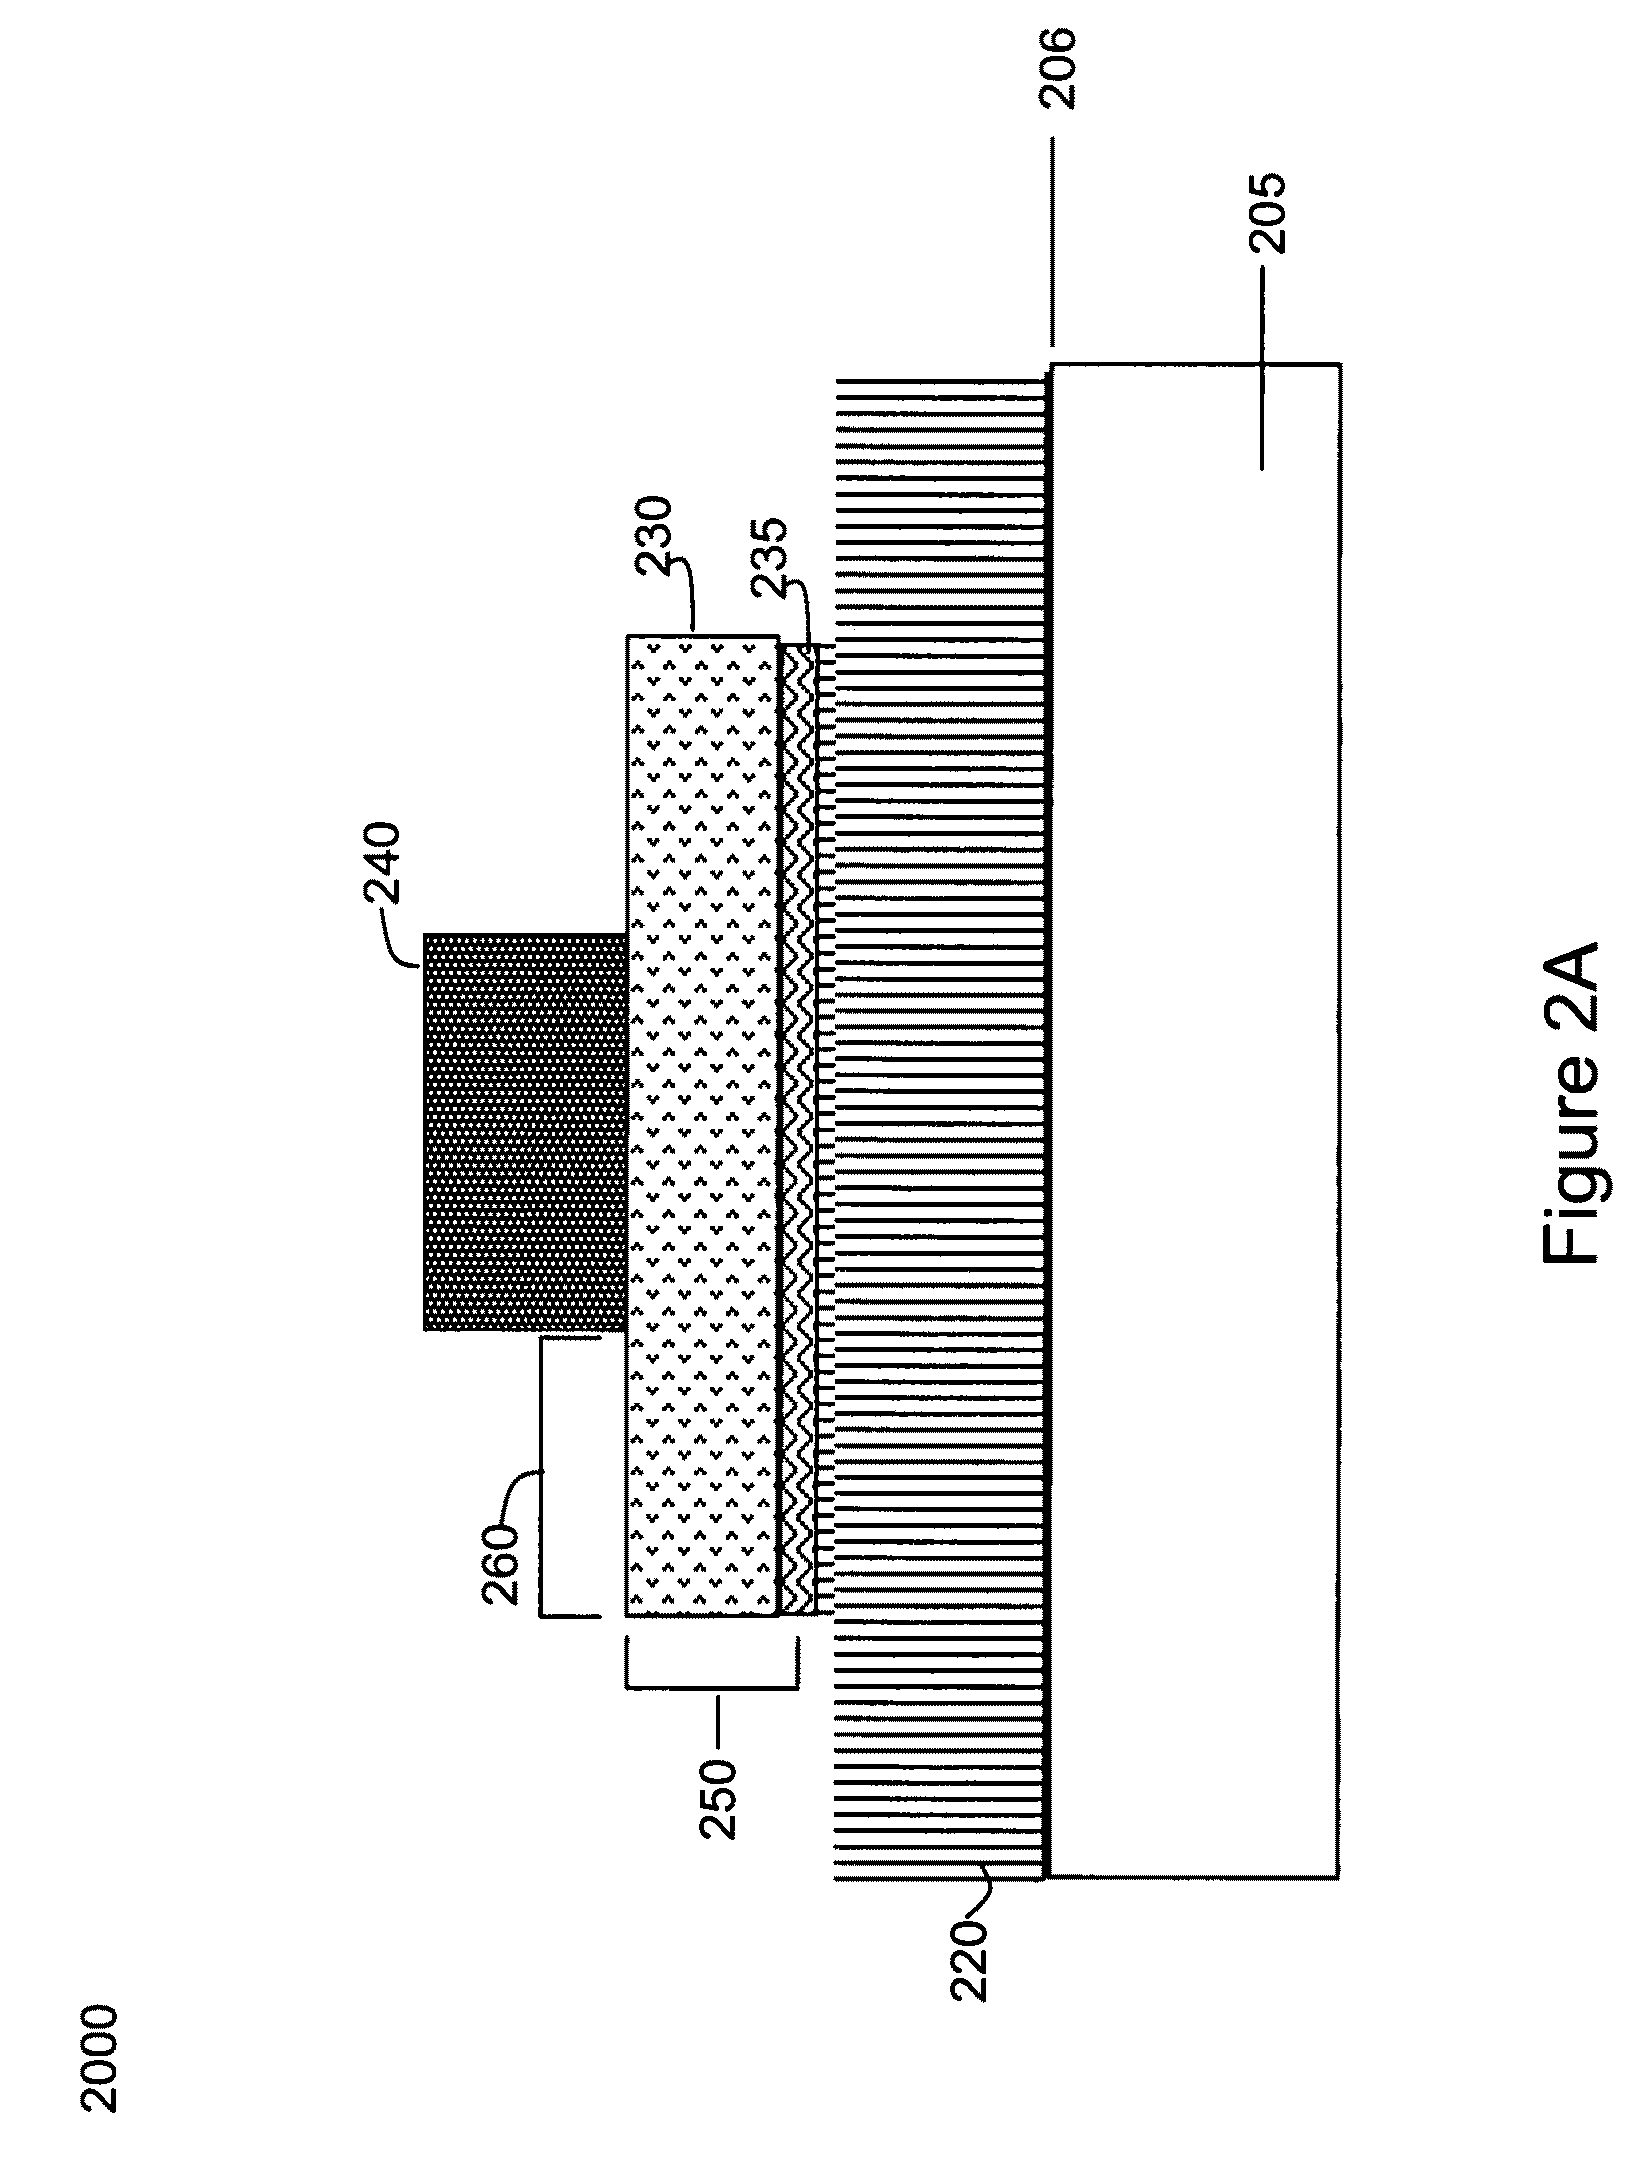 Method of forming a carbon nanotube-based contact to semiconductor